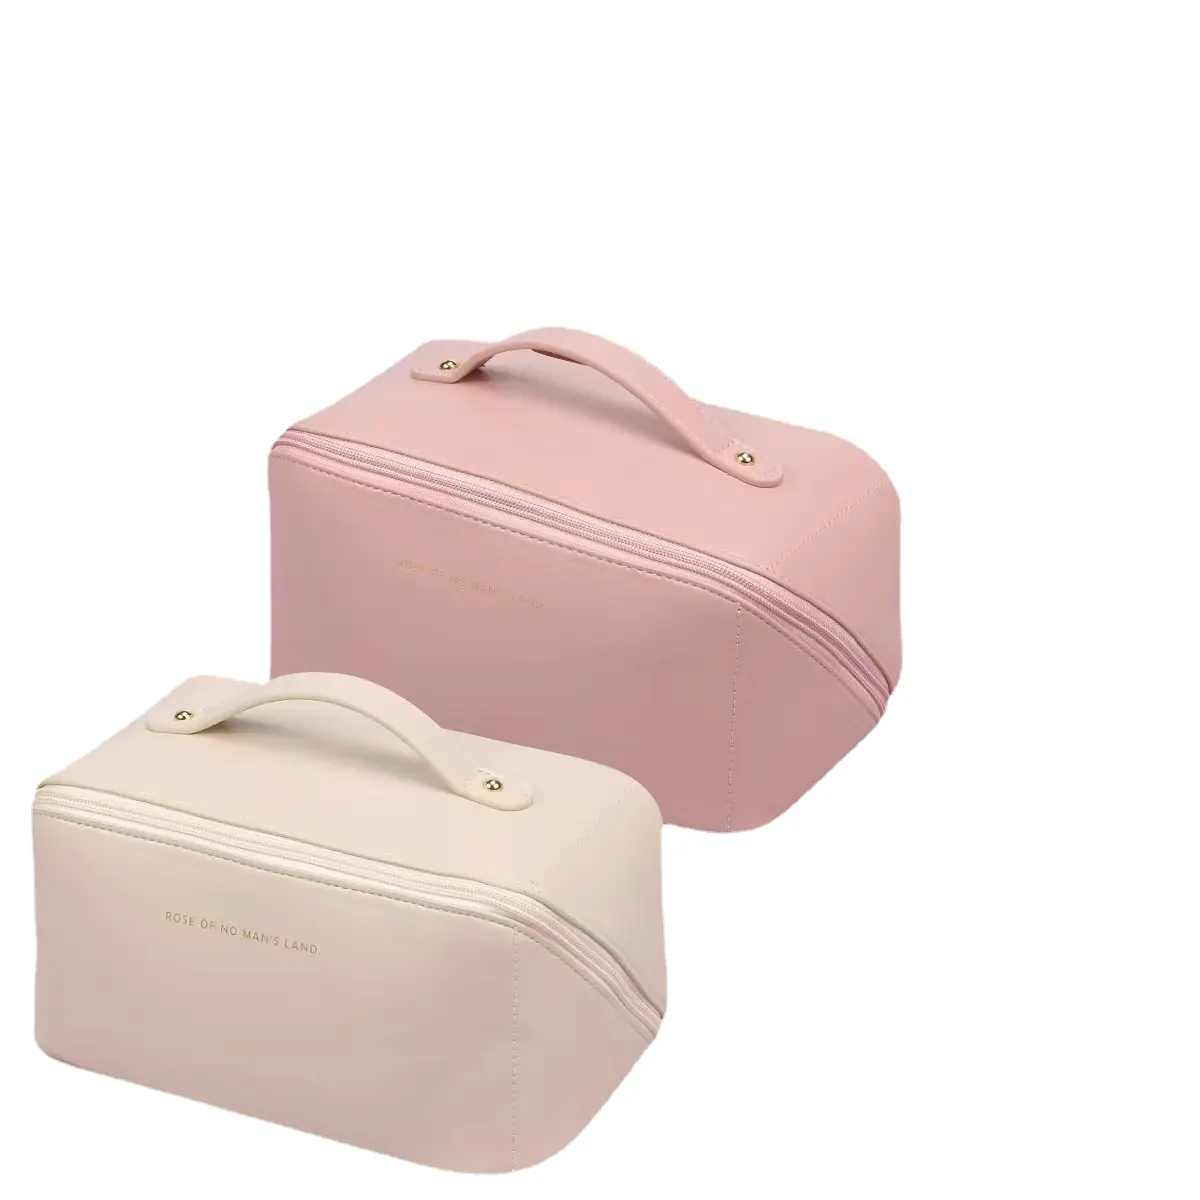 Large Capacity Waterproof PU Leather Travel Makeup Cosmetic Bag Pouch